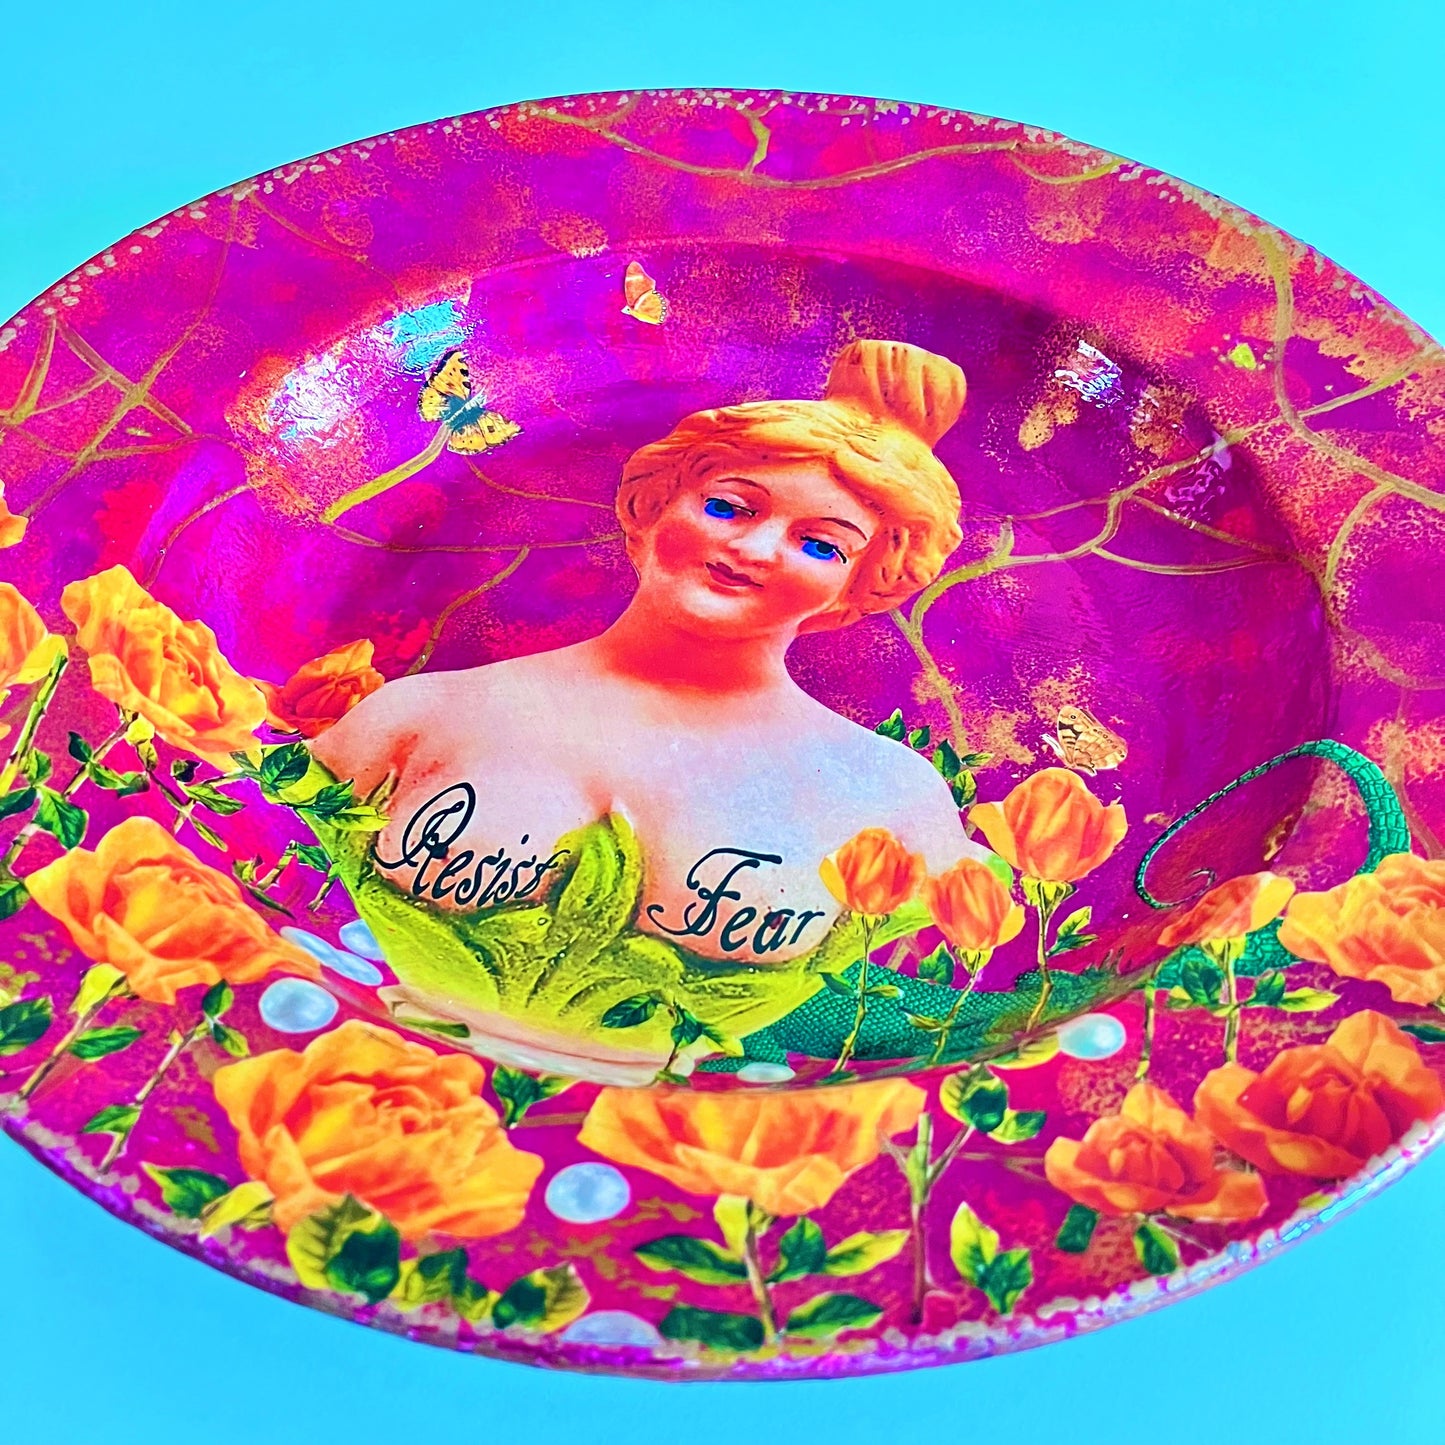 "Resist Fear" Wall Plate by House of Frisson, featuring a female bust statue with "Resist Fear" written across breasts, surrounded by flowers, and pearls, on a purple background. Closeup details showing flowers, pearls, and a lizard.